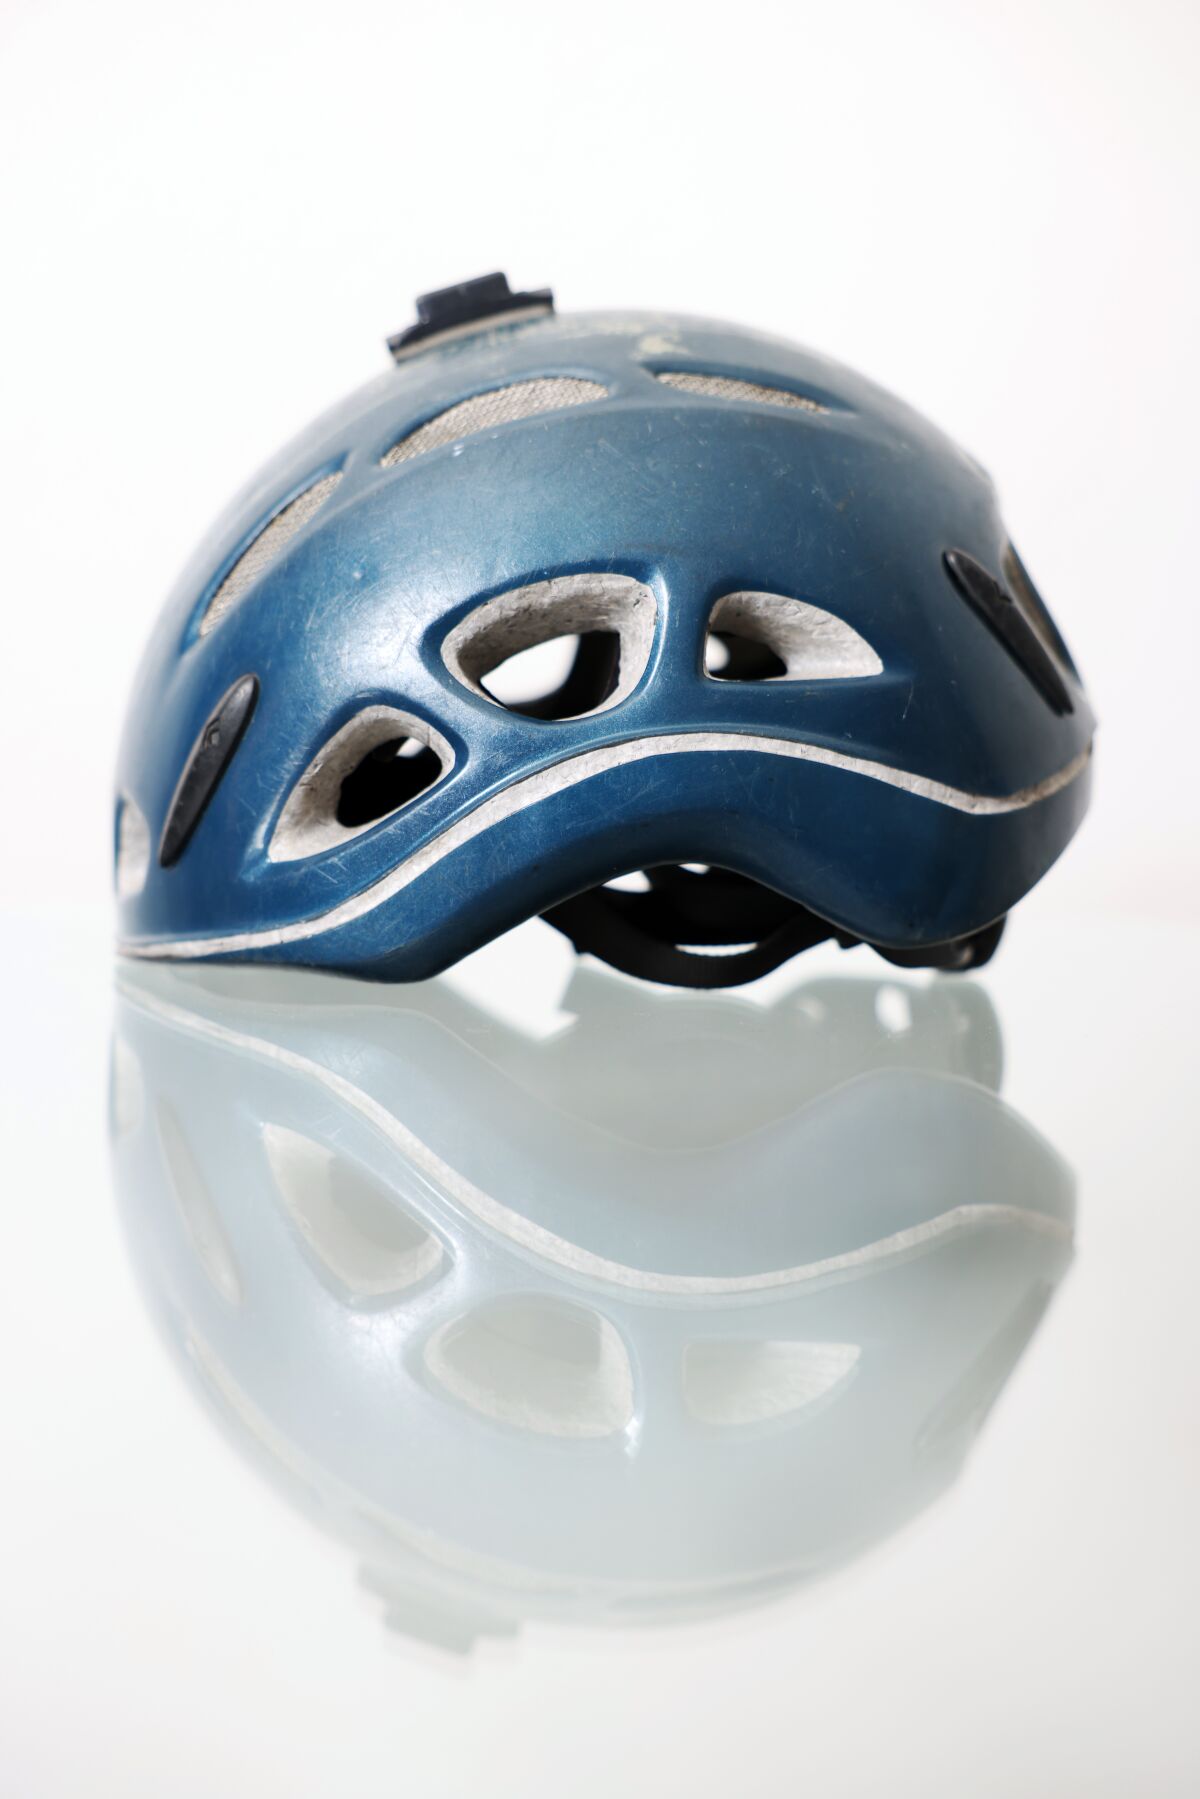 A blue helmet with airflow vents.